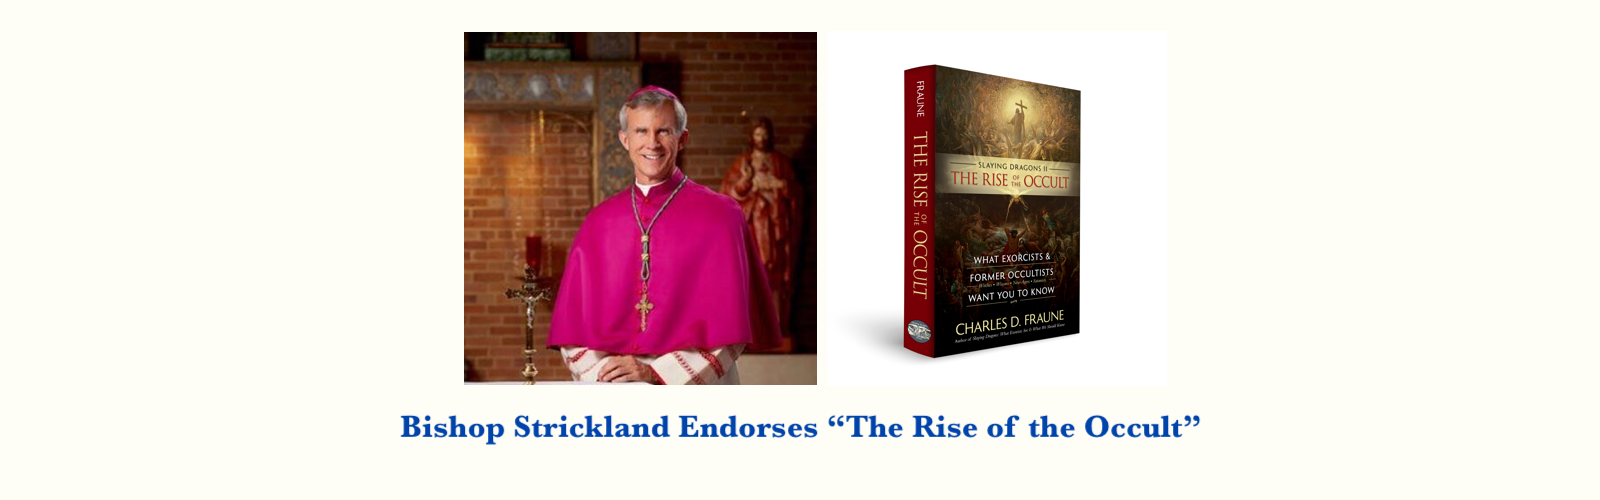 Second Bishop Endorsment for "The Rise of the Occult" - Bp. Joseph Strickland!